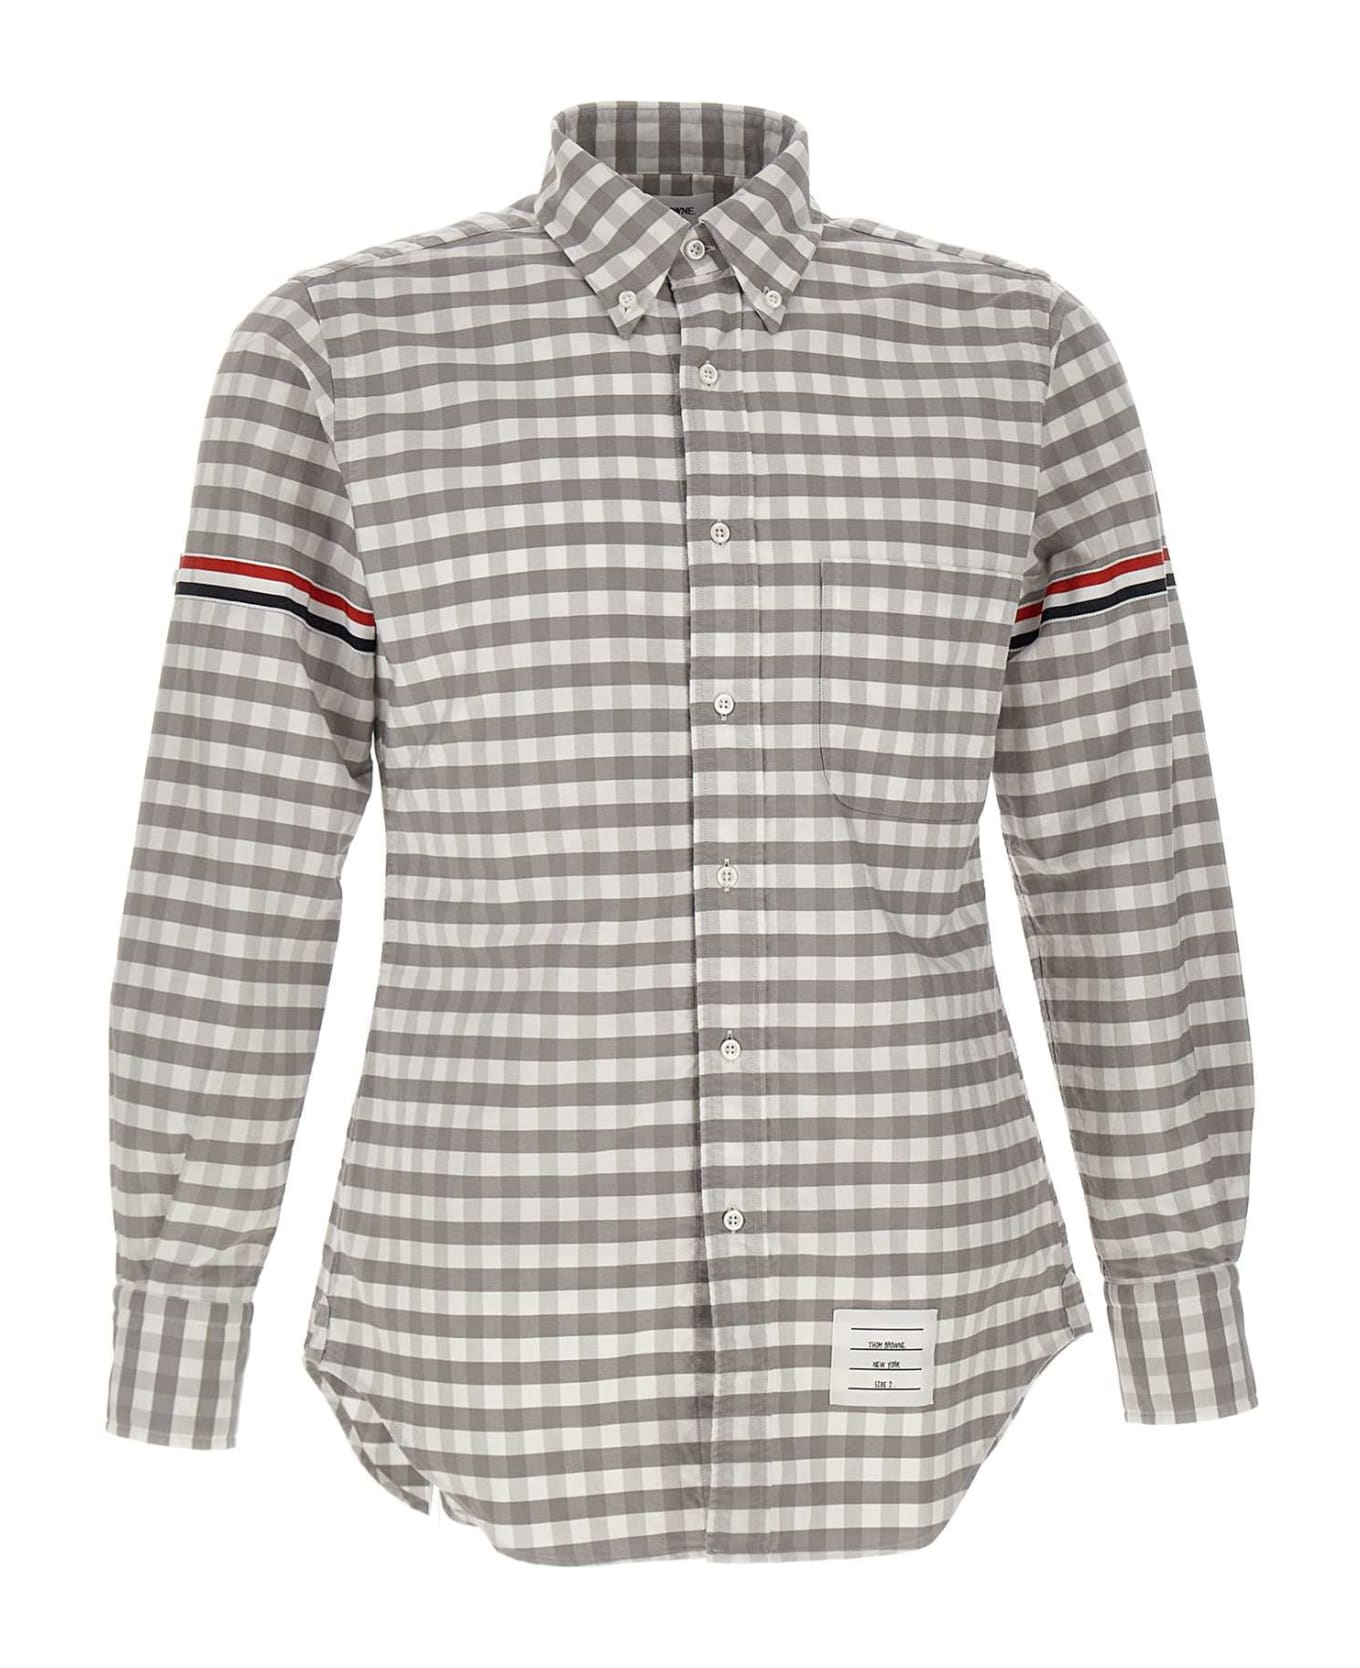 Thom Browne Cotton 'classic Fit Shirt Check Oxford' - Grey